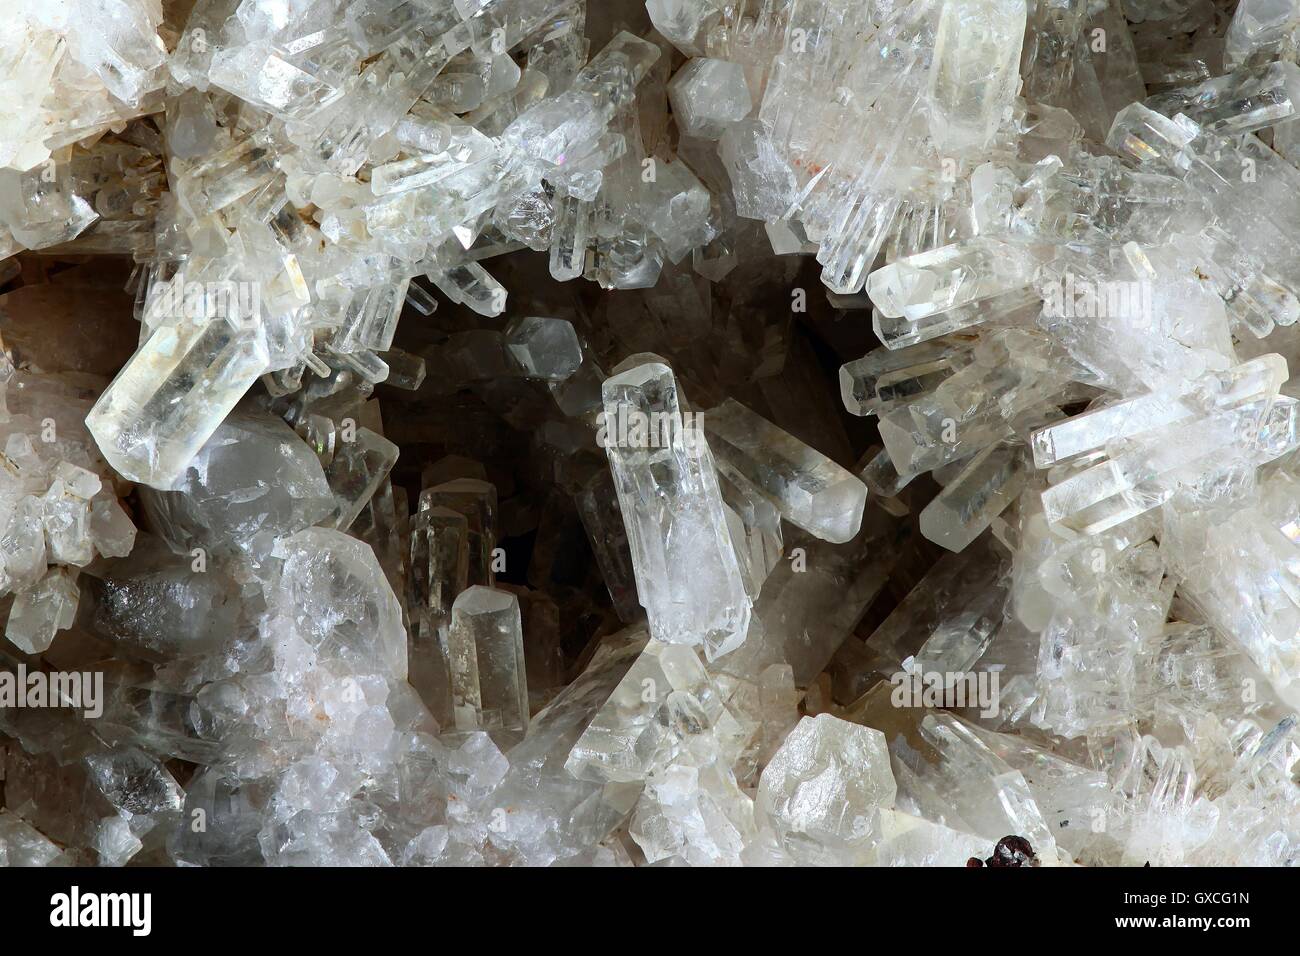 Calcite crystals in marble Stock Photo